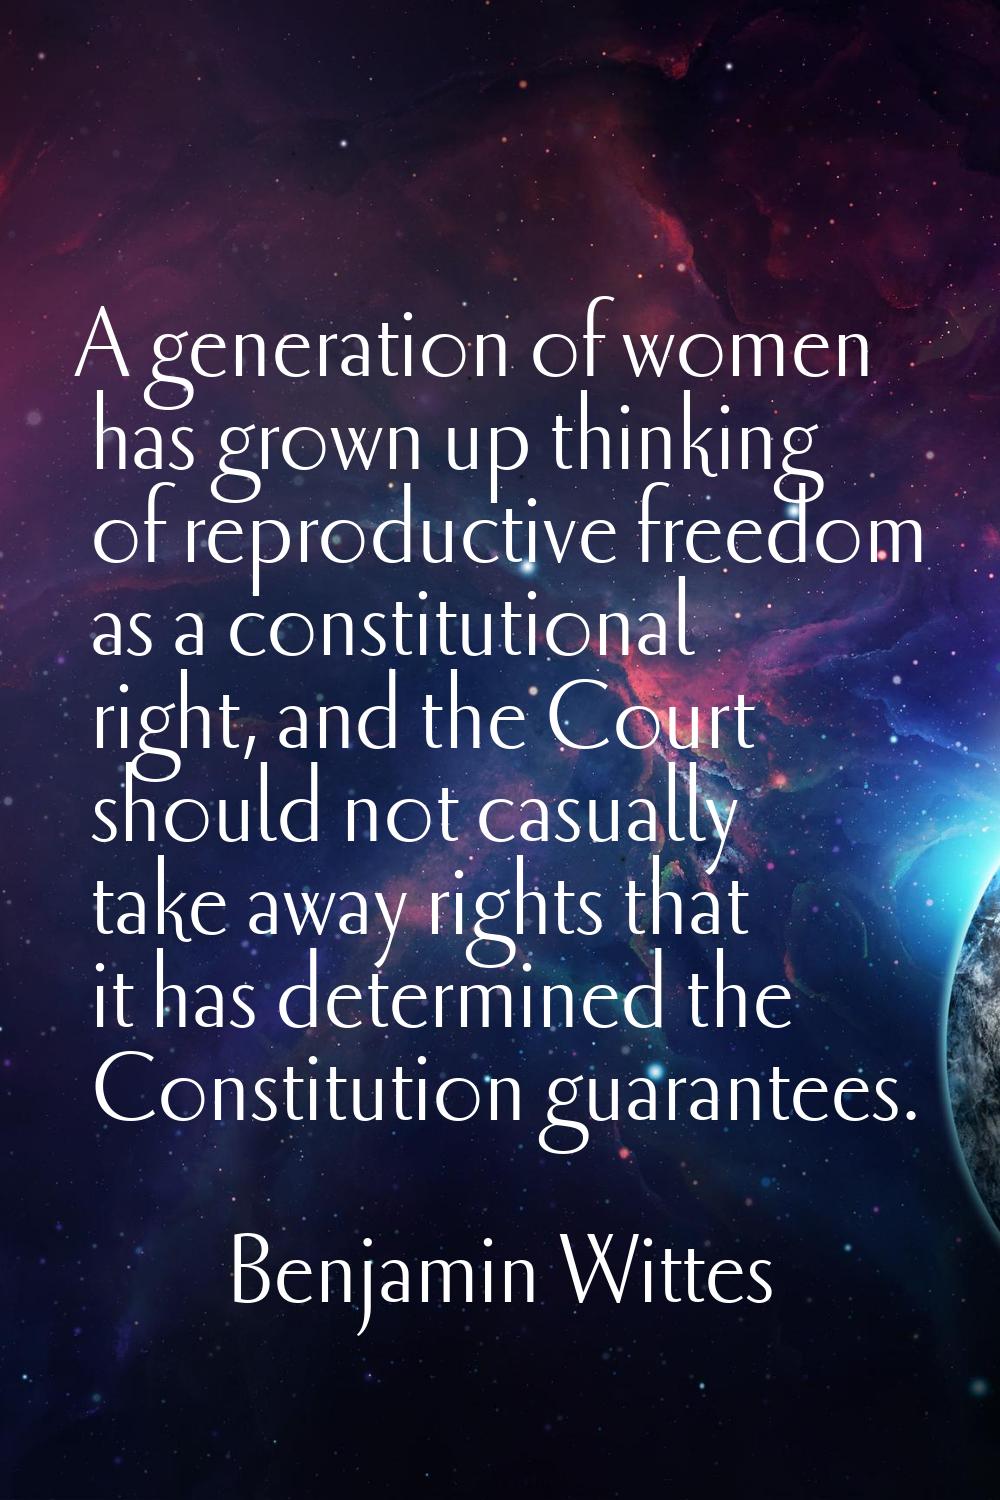 A generation of women has grown up thinking of reproductive freedom as a constitutional right, and 